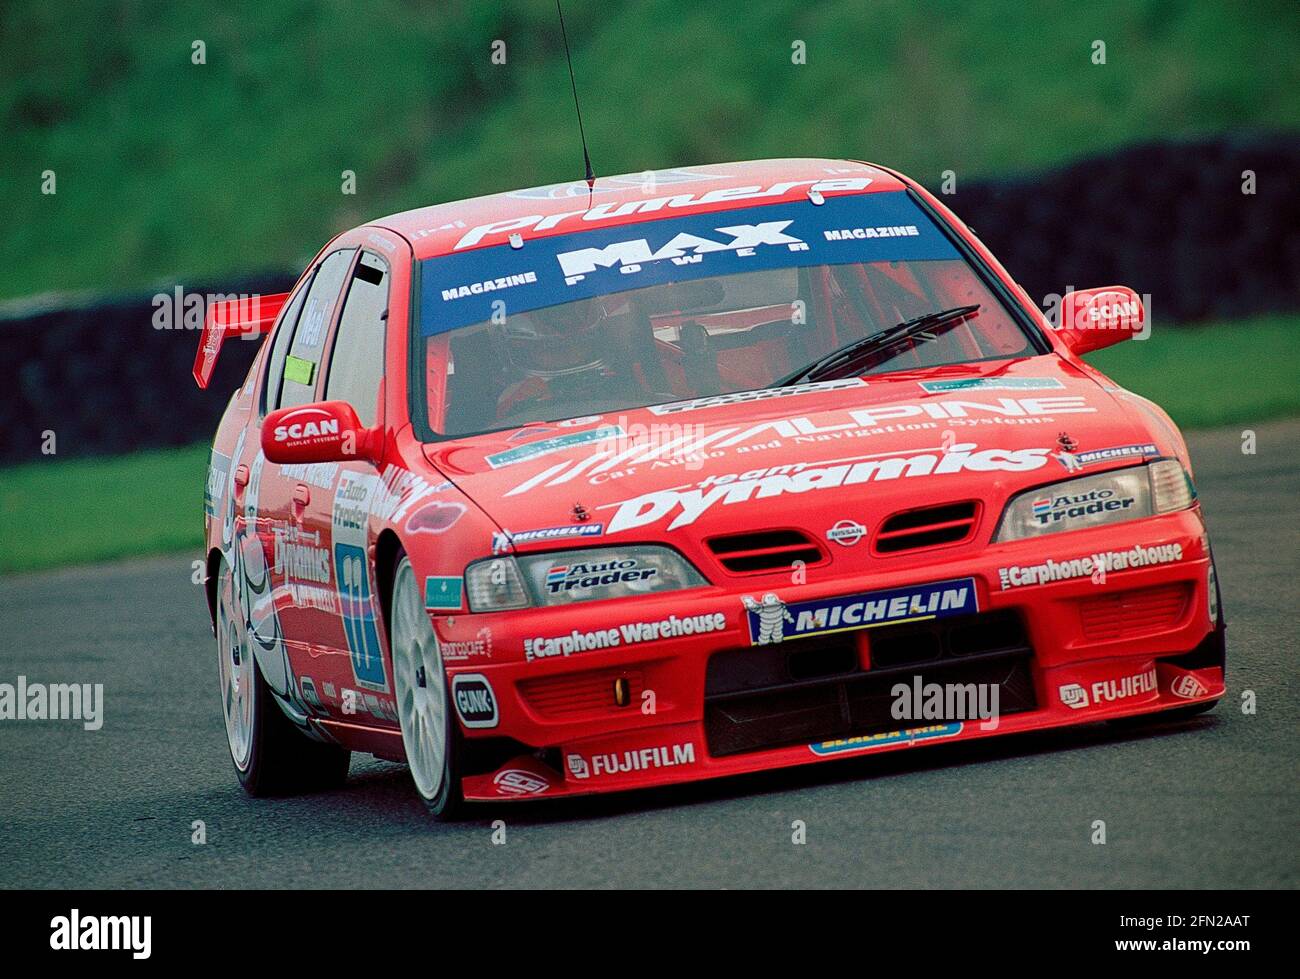 Matt Neal racing in his Team Dynamics Nissan Primera GT  in rounds 5 and 6 in the BTCC championship at Thruxton Circuit in 1999 Stock Photo